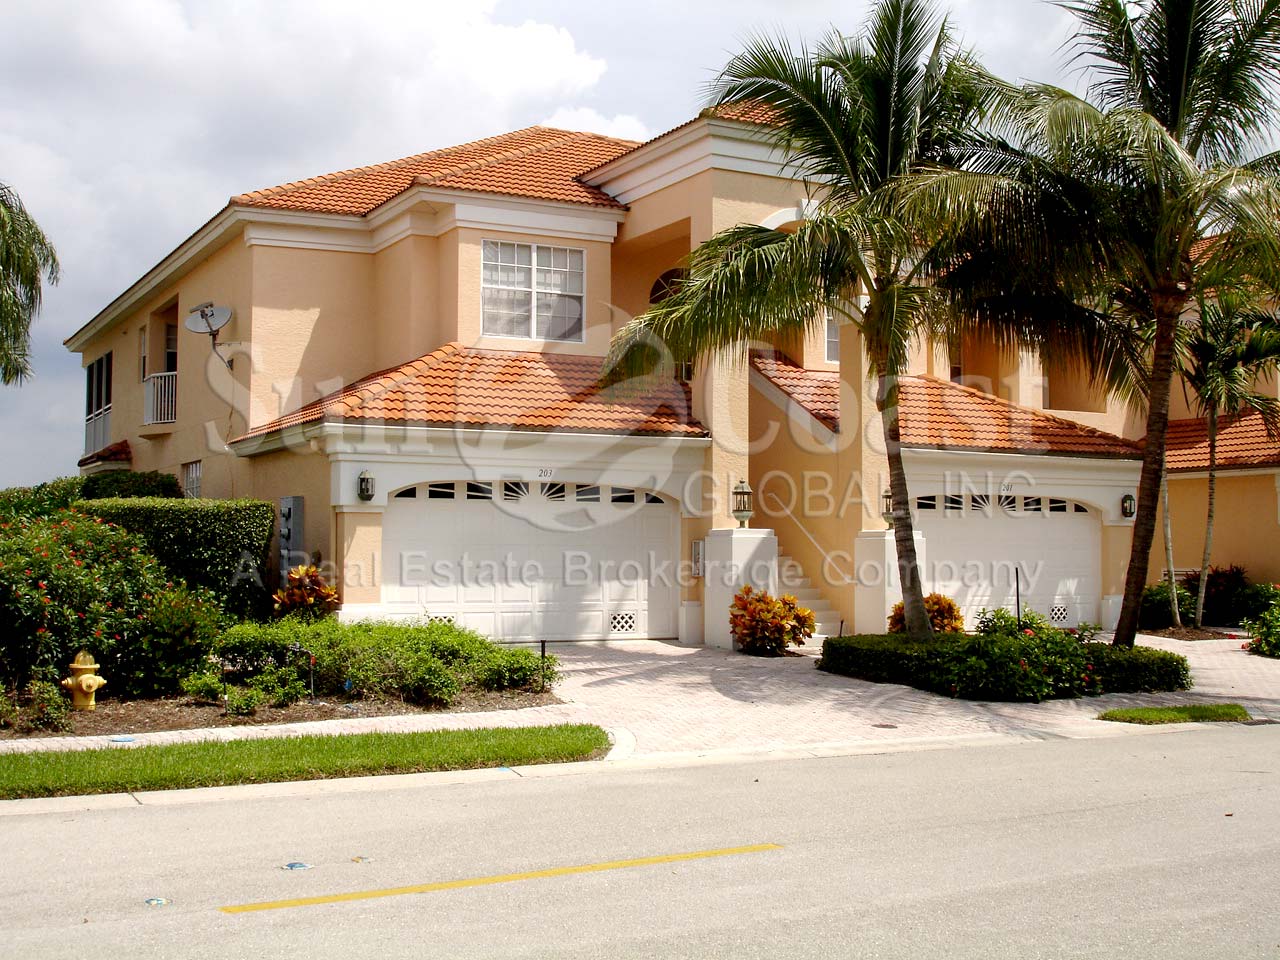 Yacht Harbour Cove is a non gated entry within the gated community of Windstar.